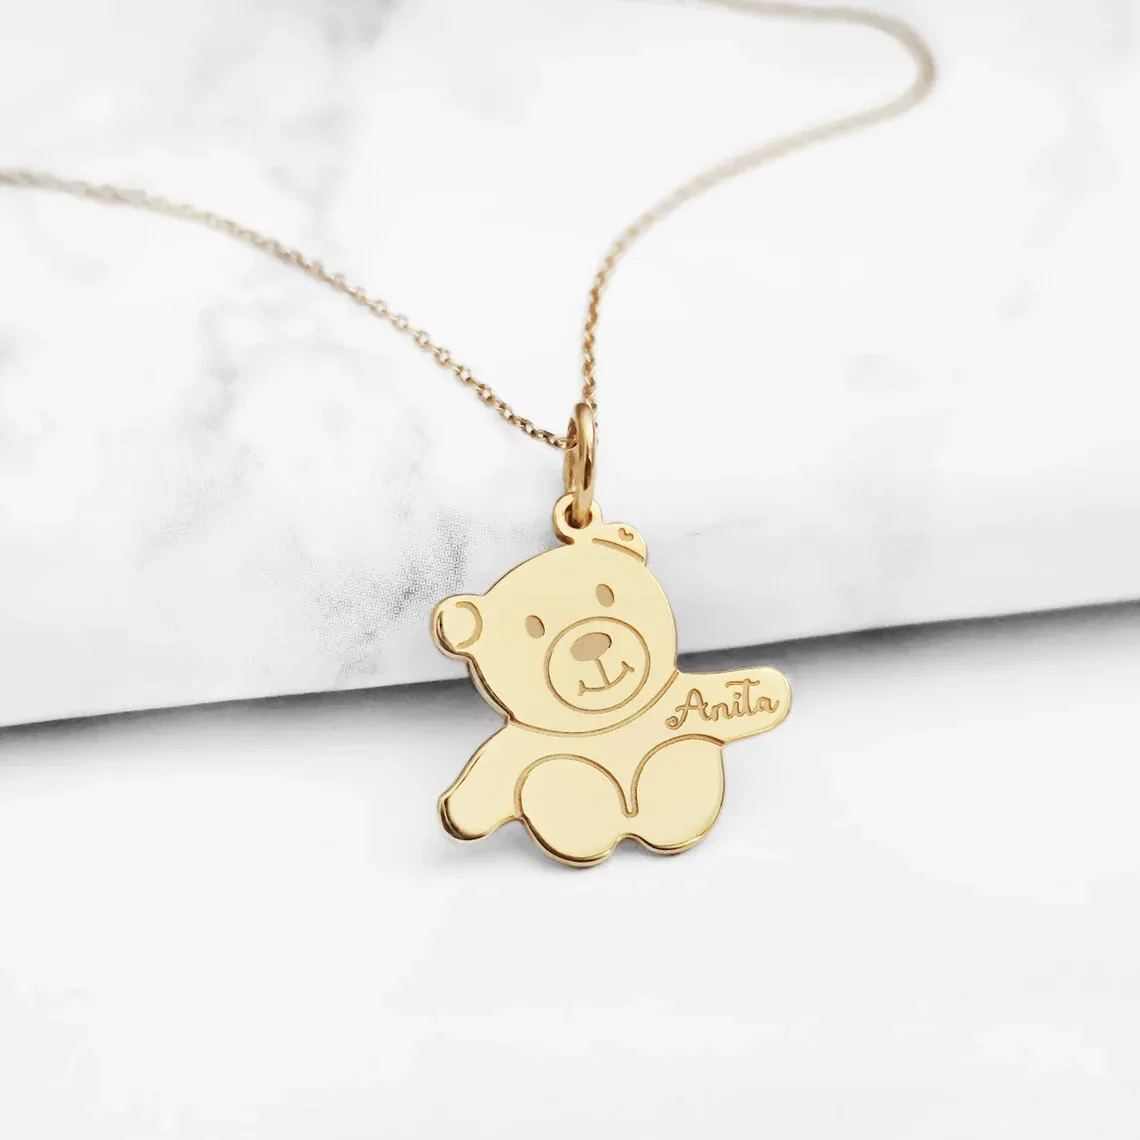 Teddy Bear Charm Necklace Personalized Custom Name Necklace